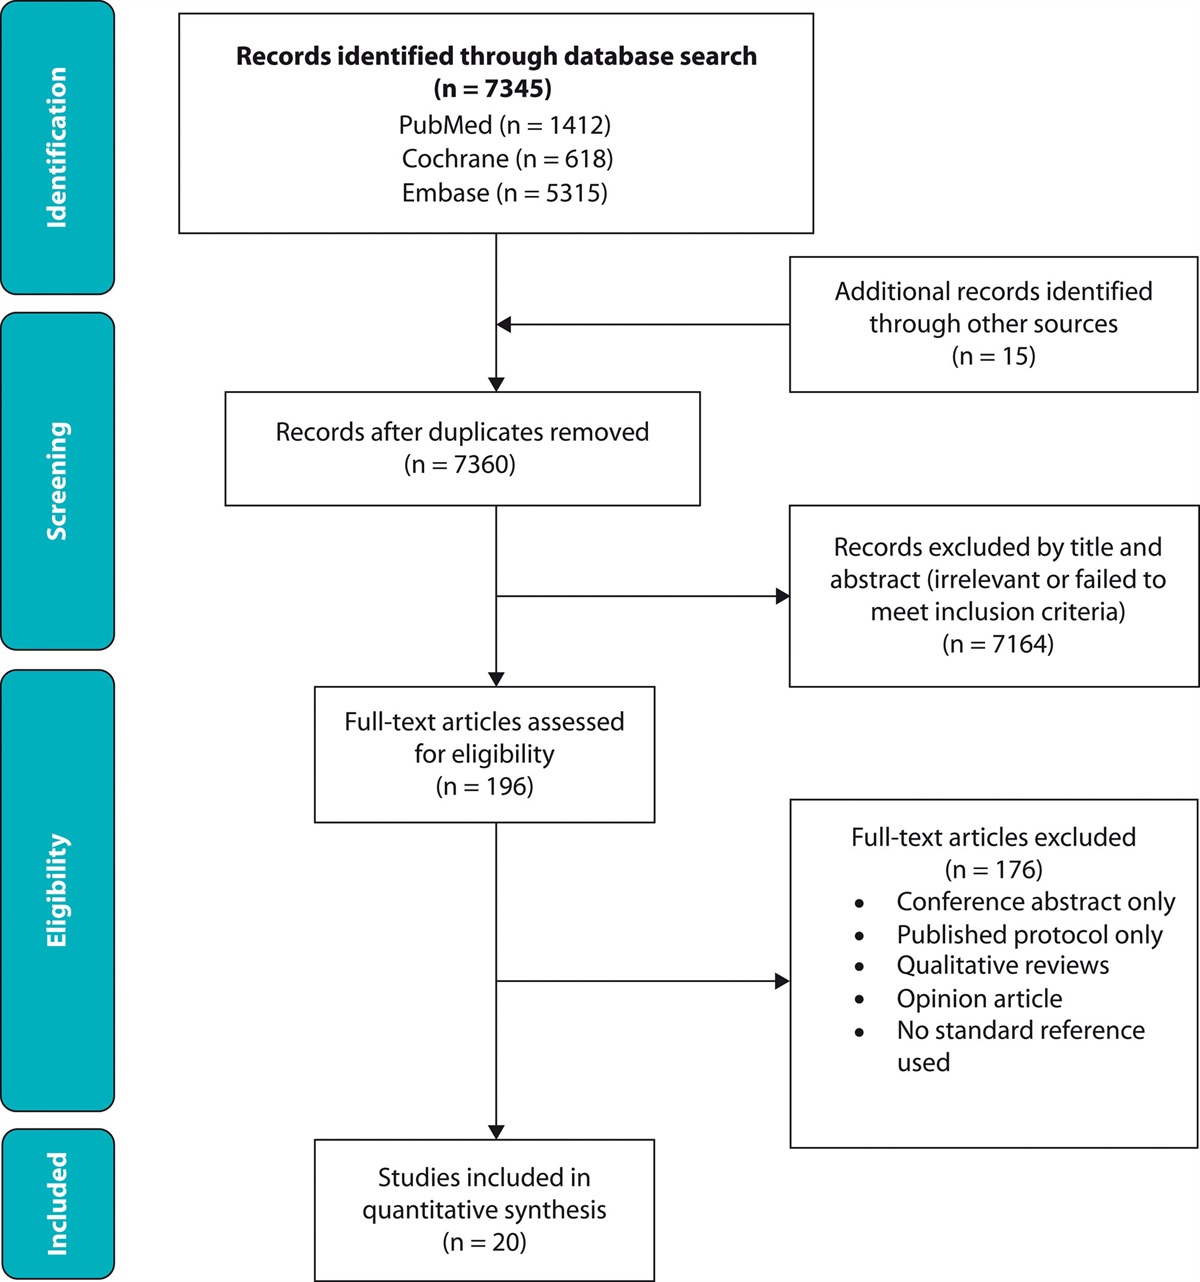 The Role of Preoperative Imaging in the Detection of Lateral Lymph Node Metastases in Rectal Cancer: A Systematic Review and Diagnostic Test Meta-analysis